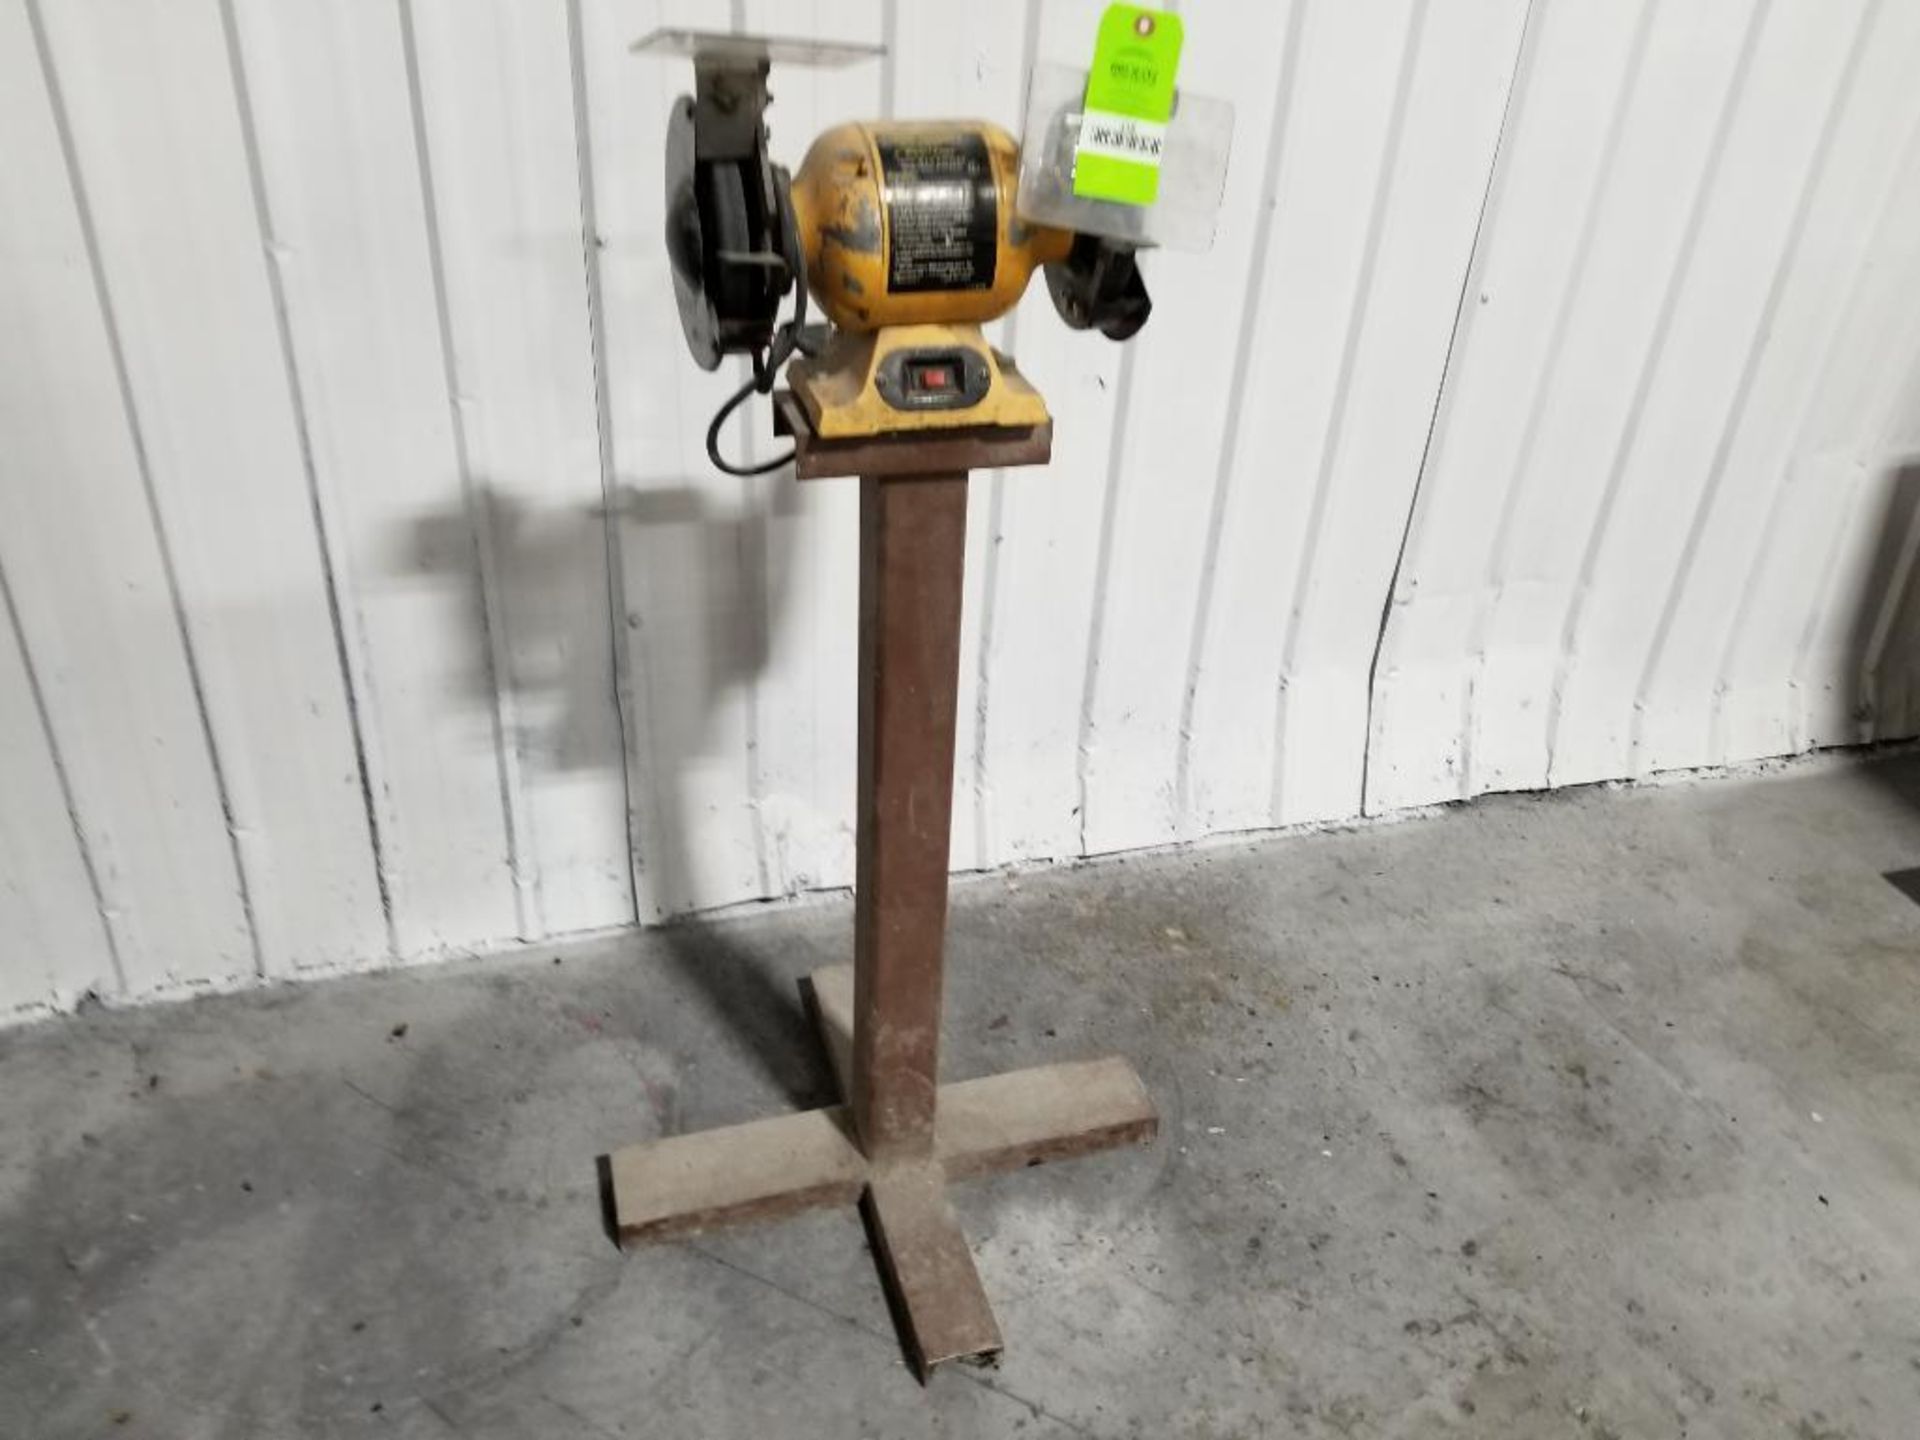 Central Machinery 6in double end bench grinder with stand. 115v single phase. - Image 2 of 9